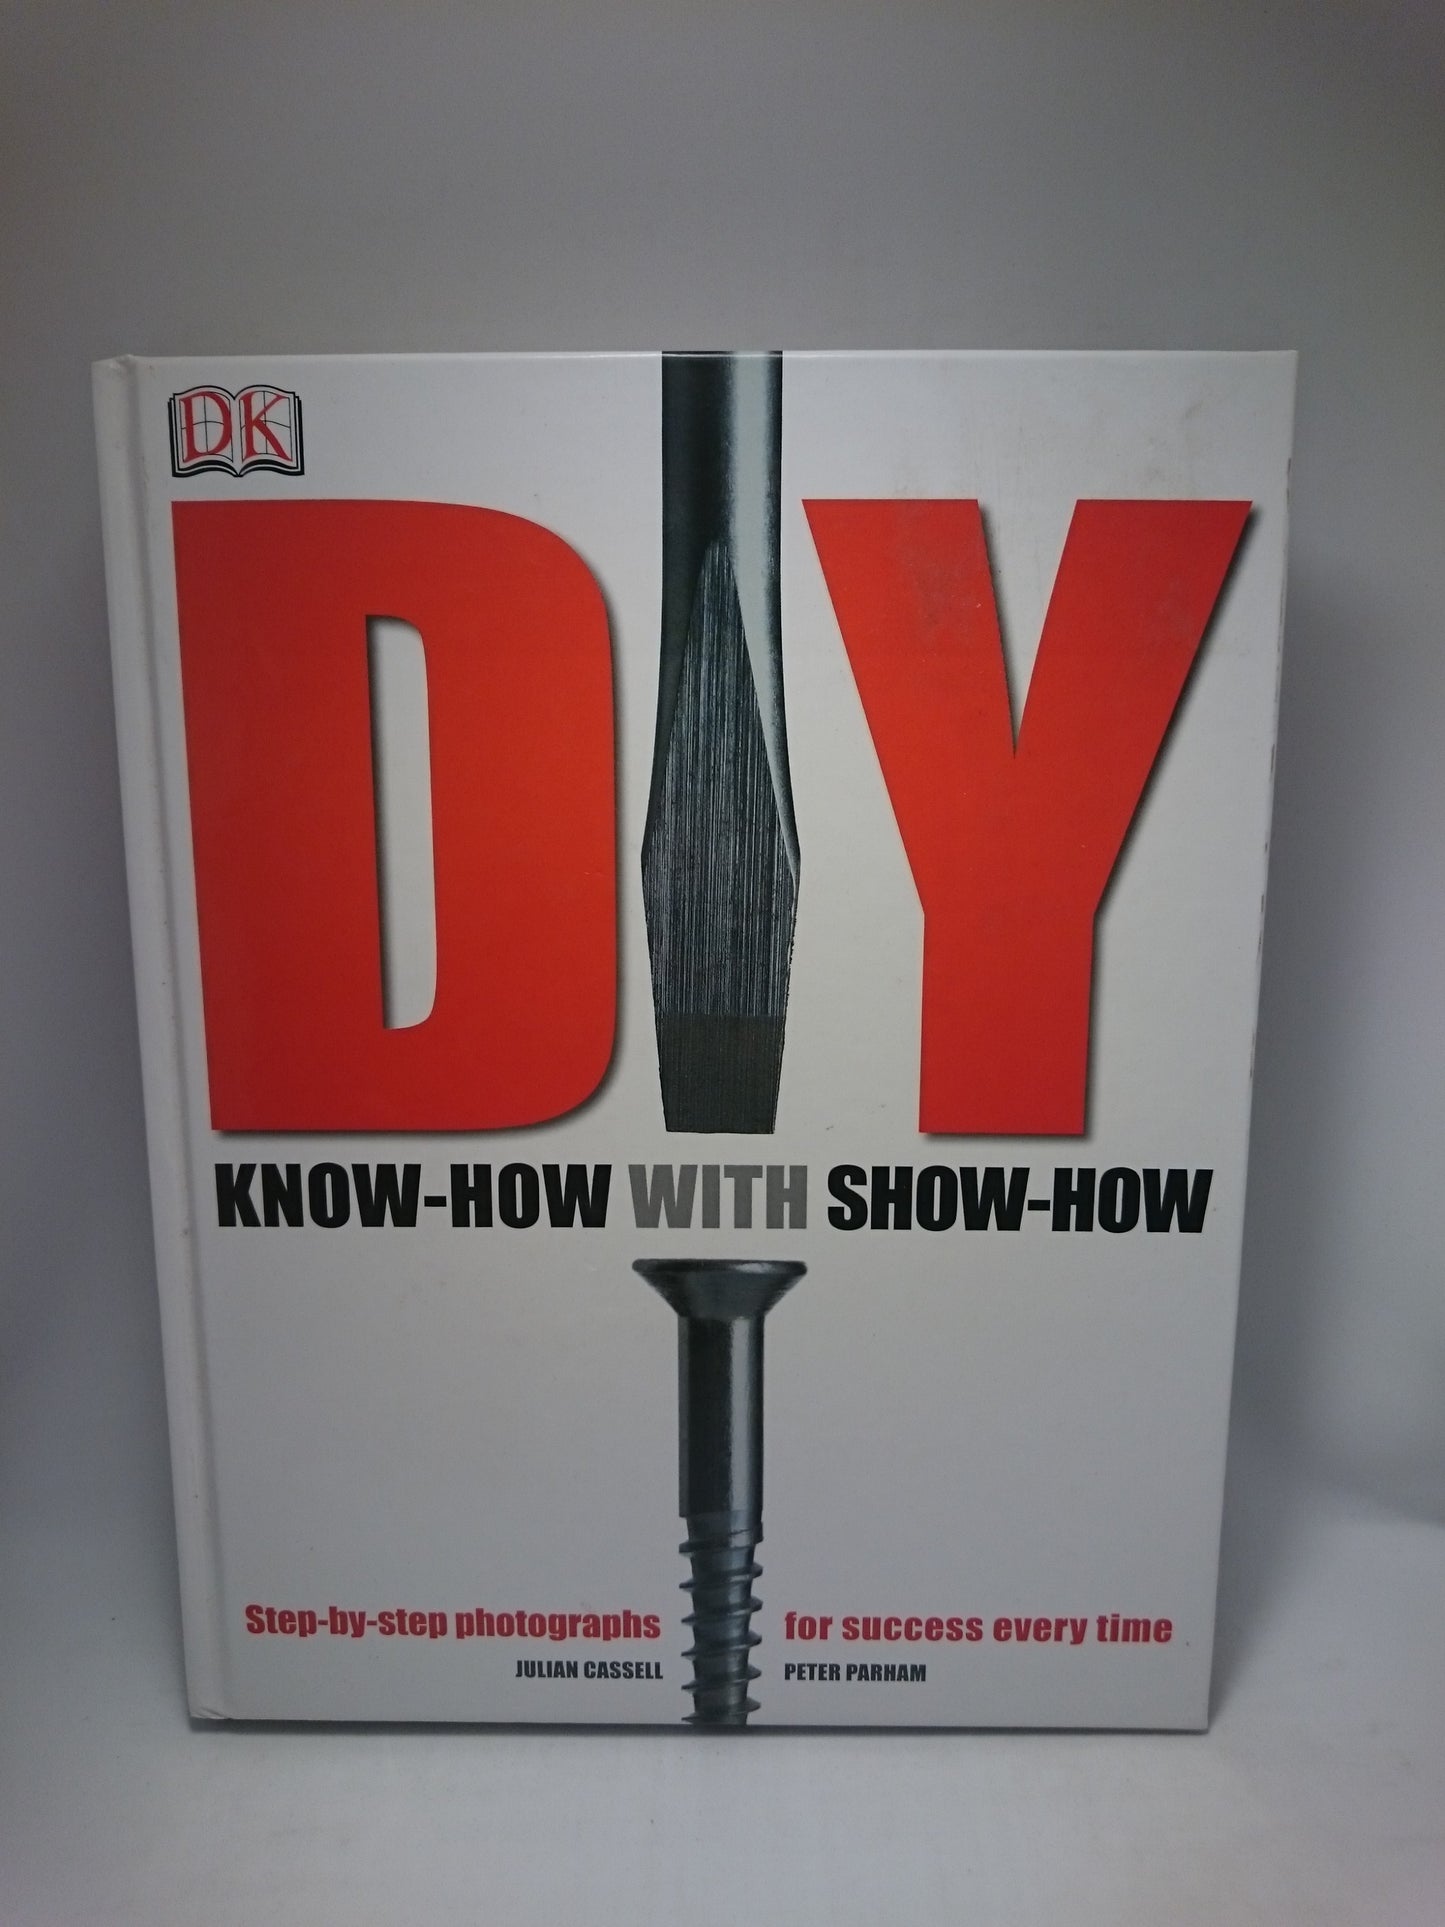 DIY Know-how with Show-how